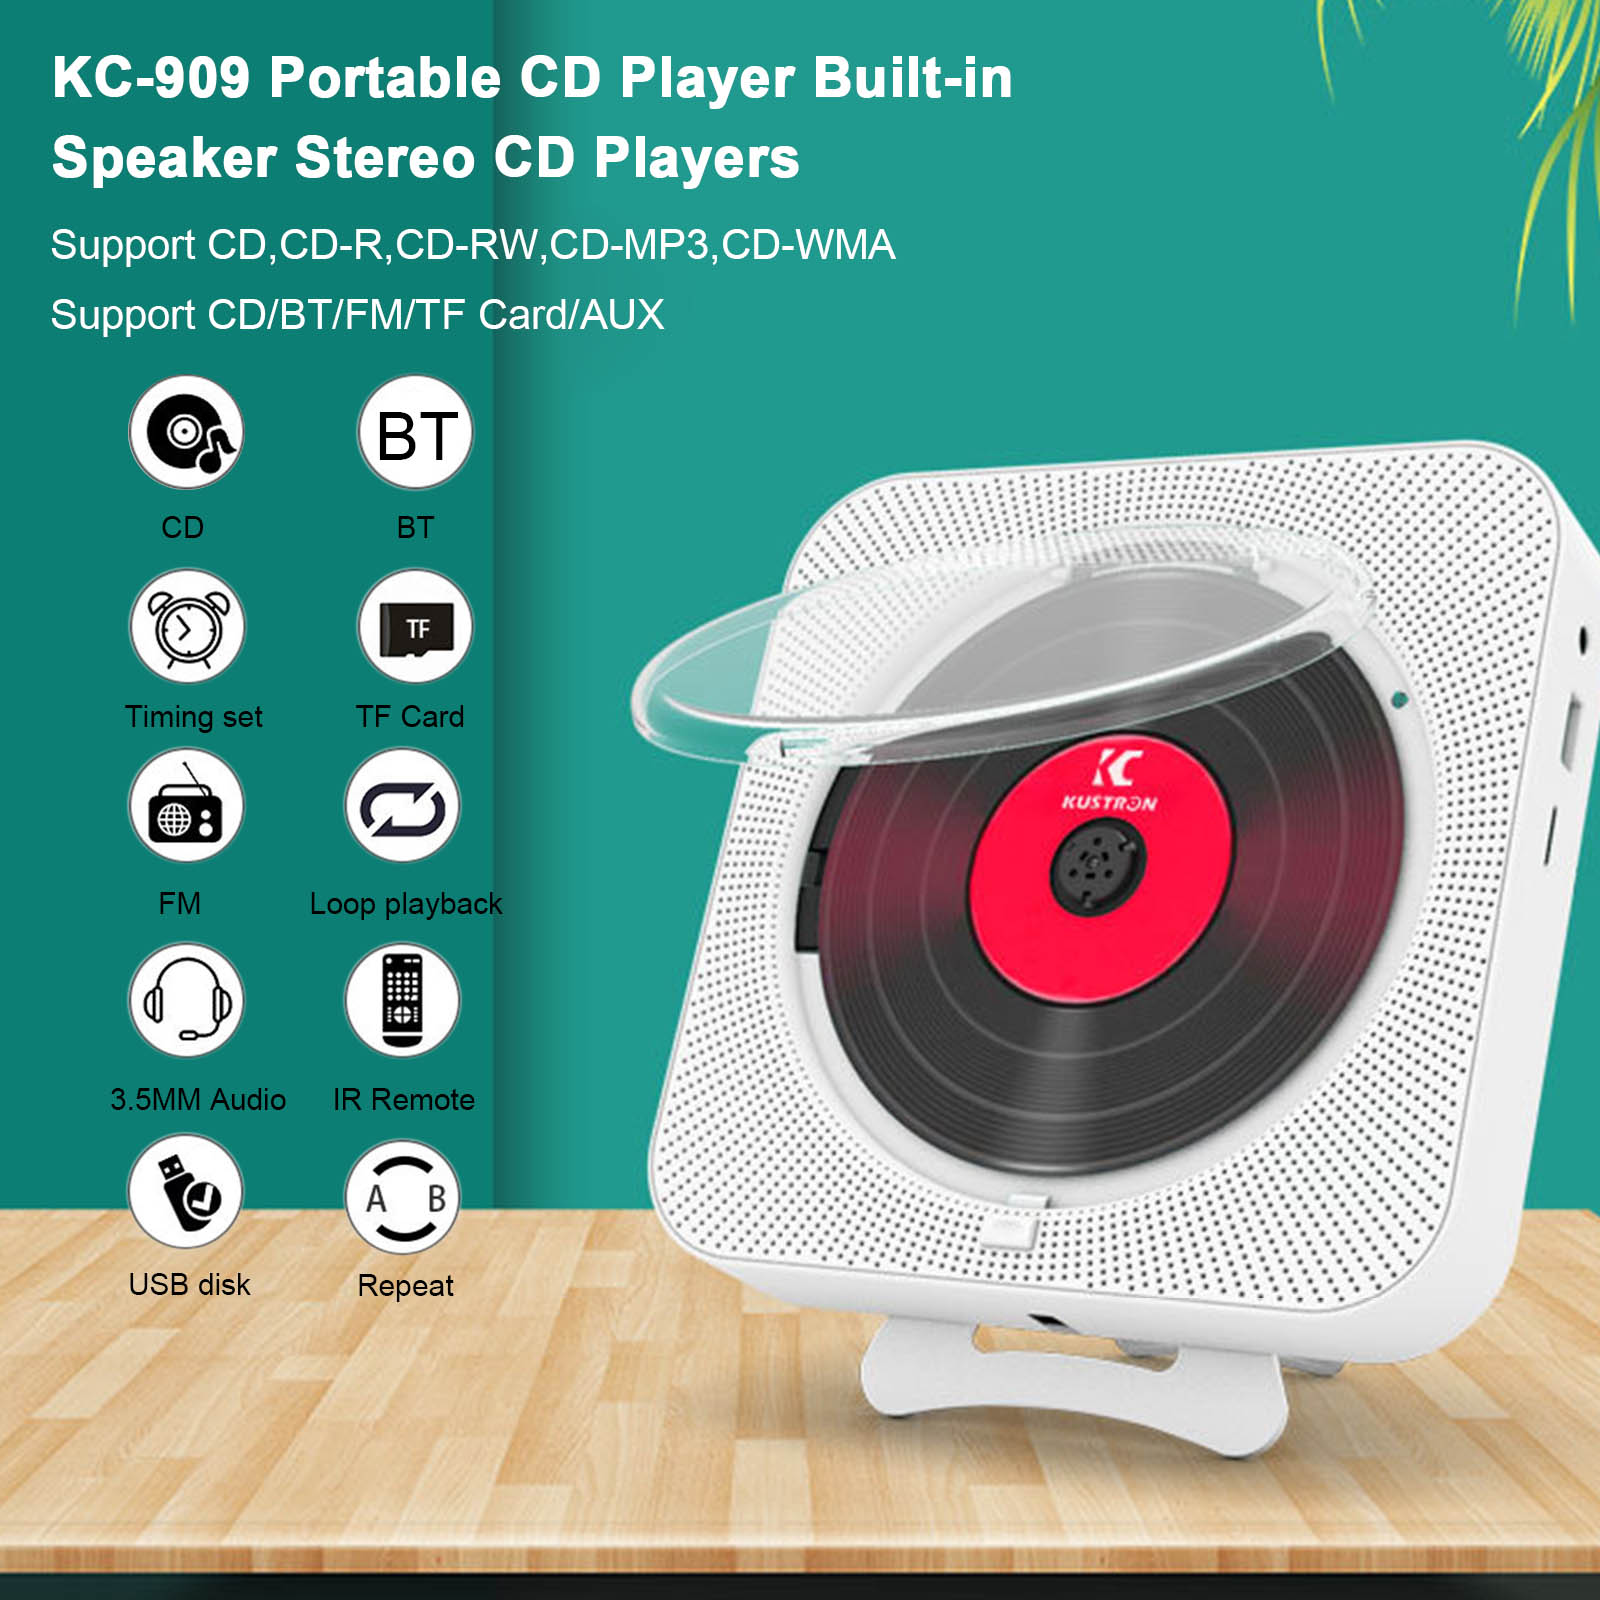 est bluetooth CD Player stero with LED screem wall mount. The portable CD player with Bluetooth speaker connectivity